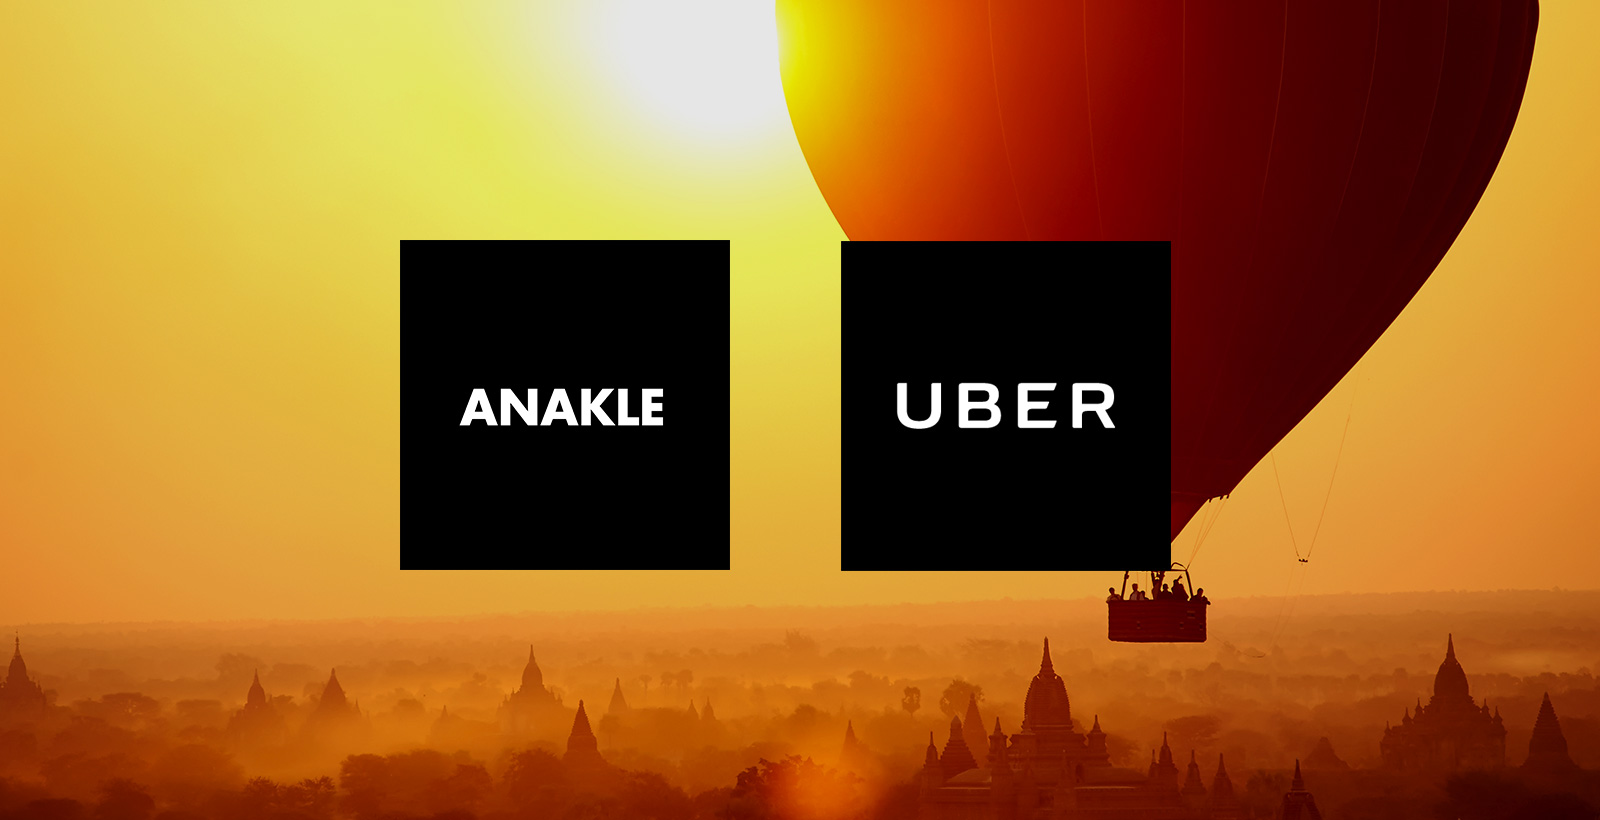 The new Uber logo looks just like the Anakle logo